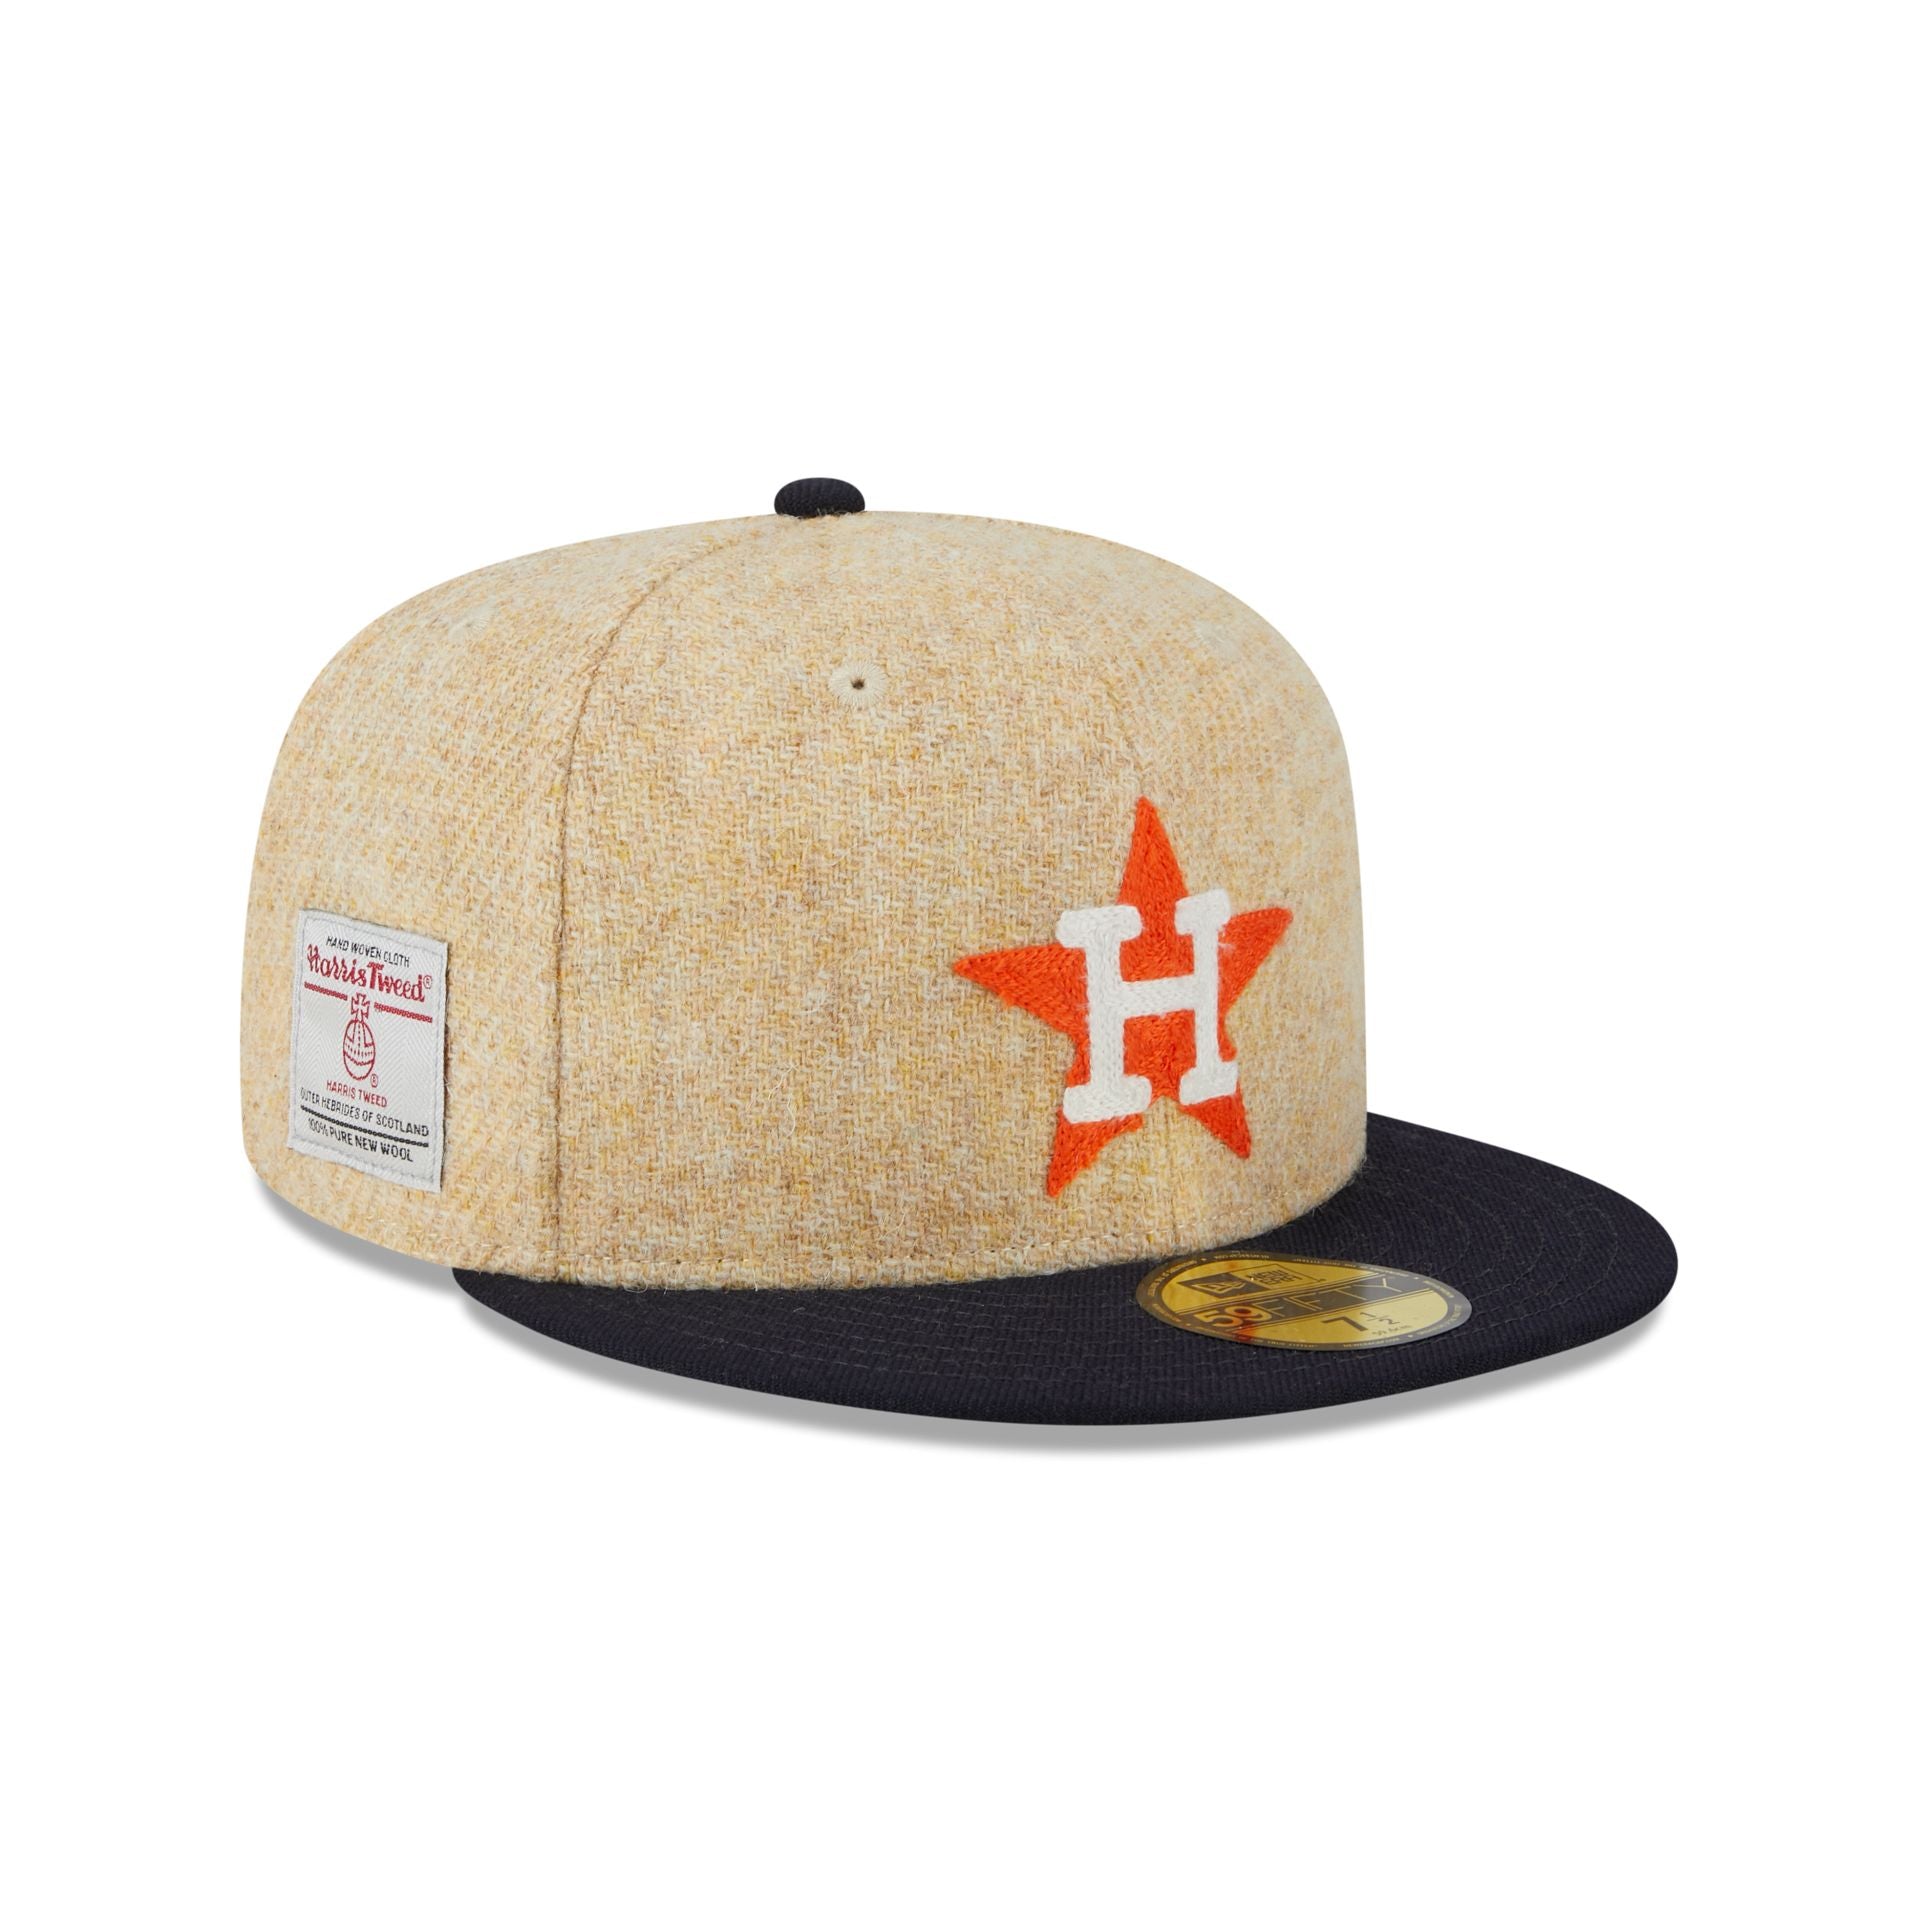 The Astros Cap That Never Was